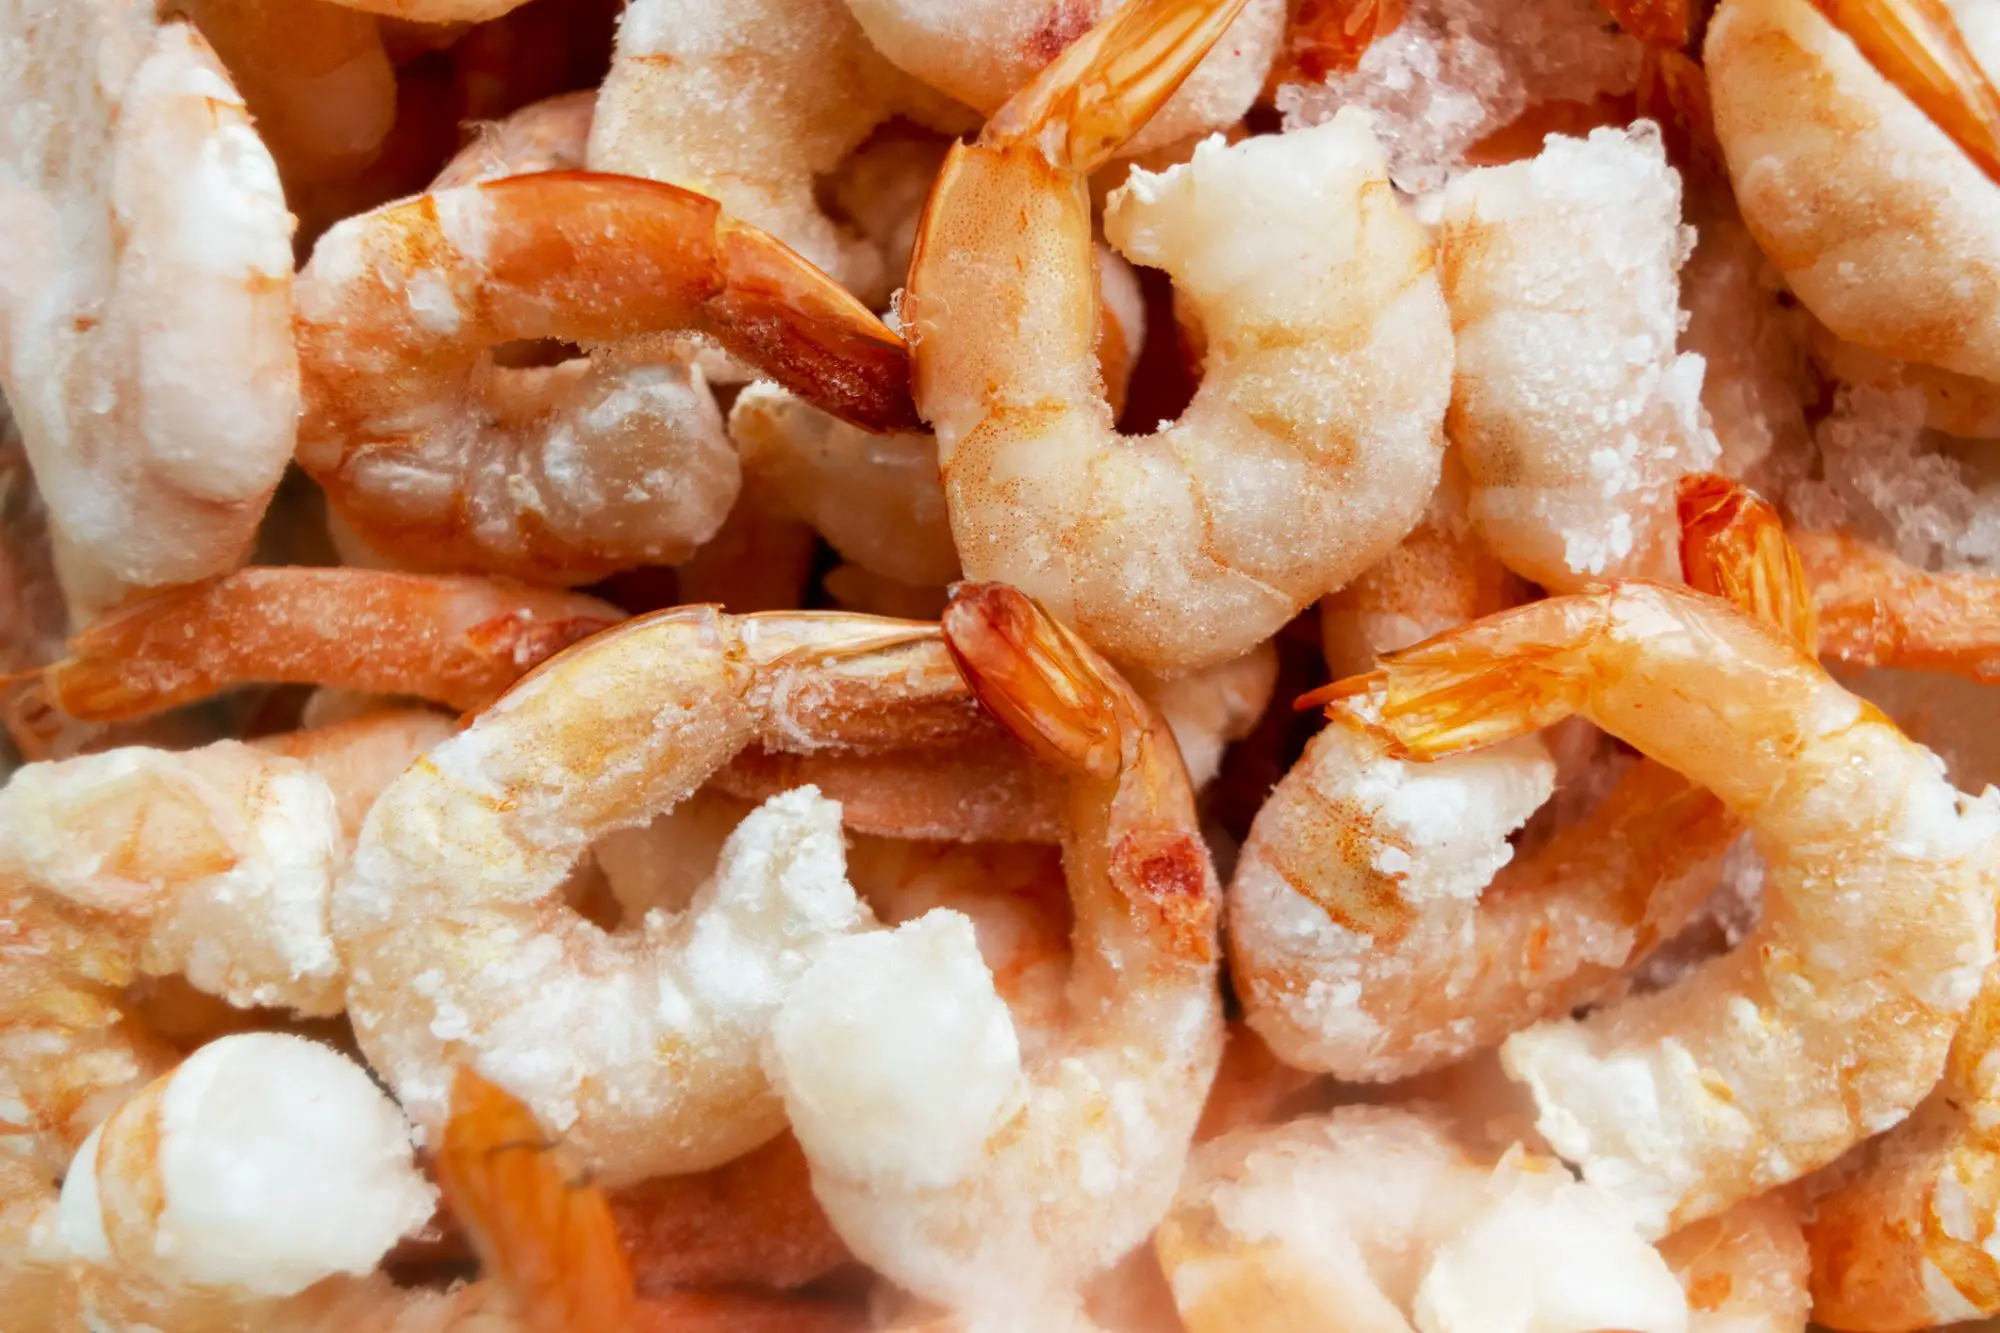 How Long Is Thawed Shrimp Good For In The Fridge? 